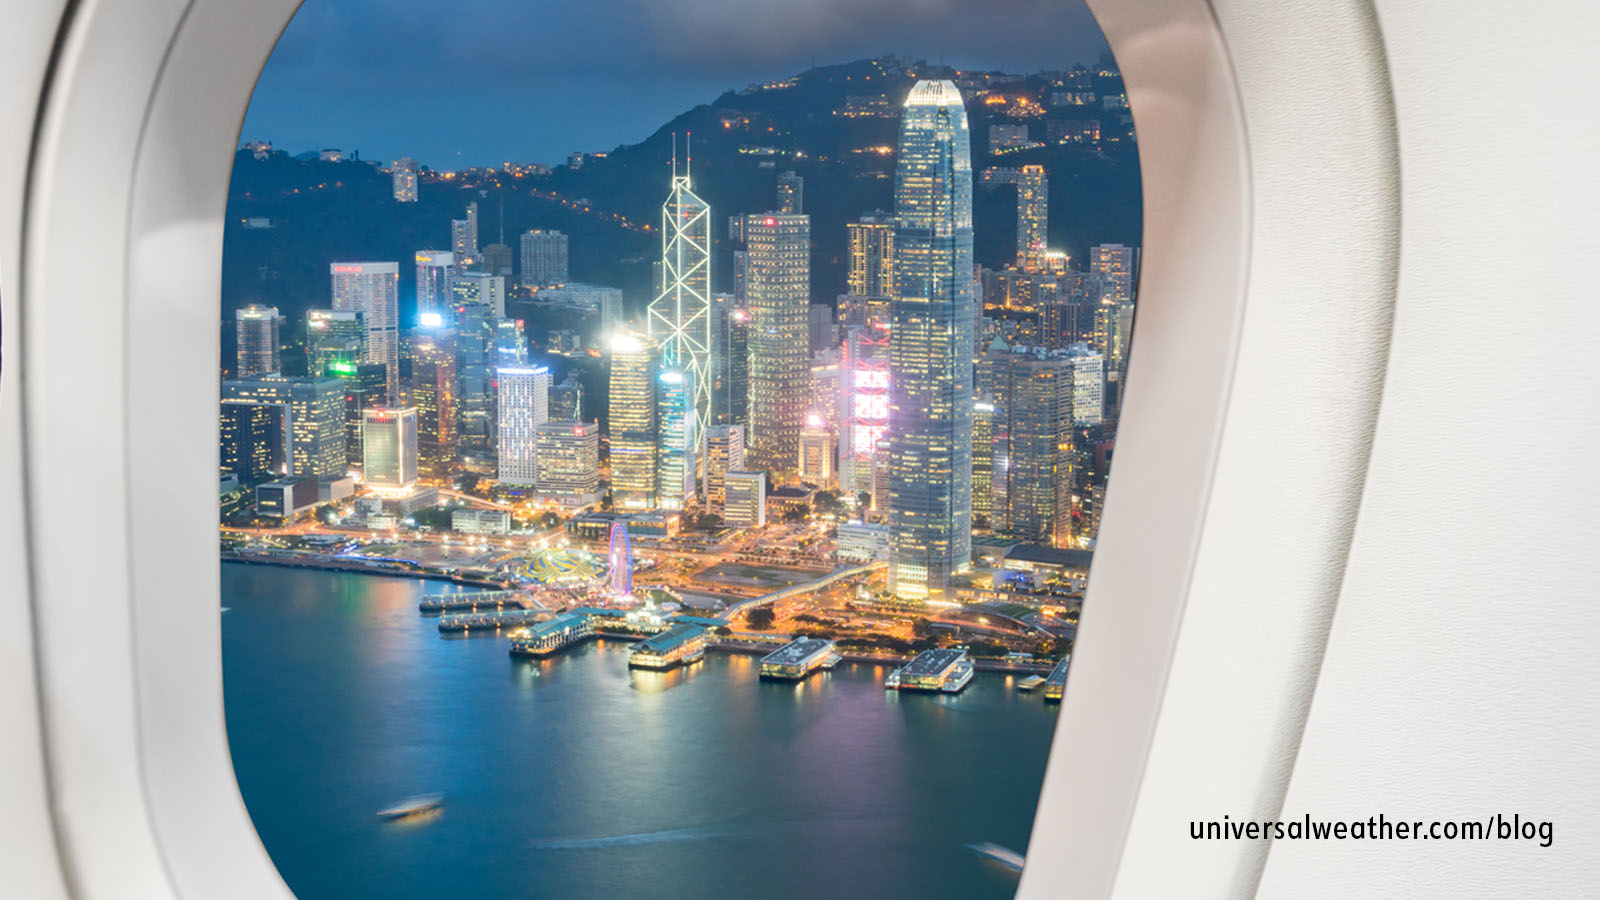 Business Aviation Operating to Hong Kong: Hotels, Local Transport, and Security